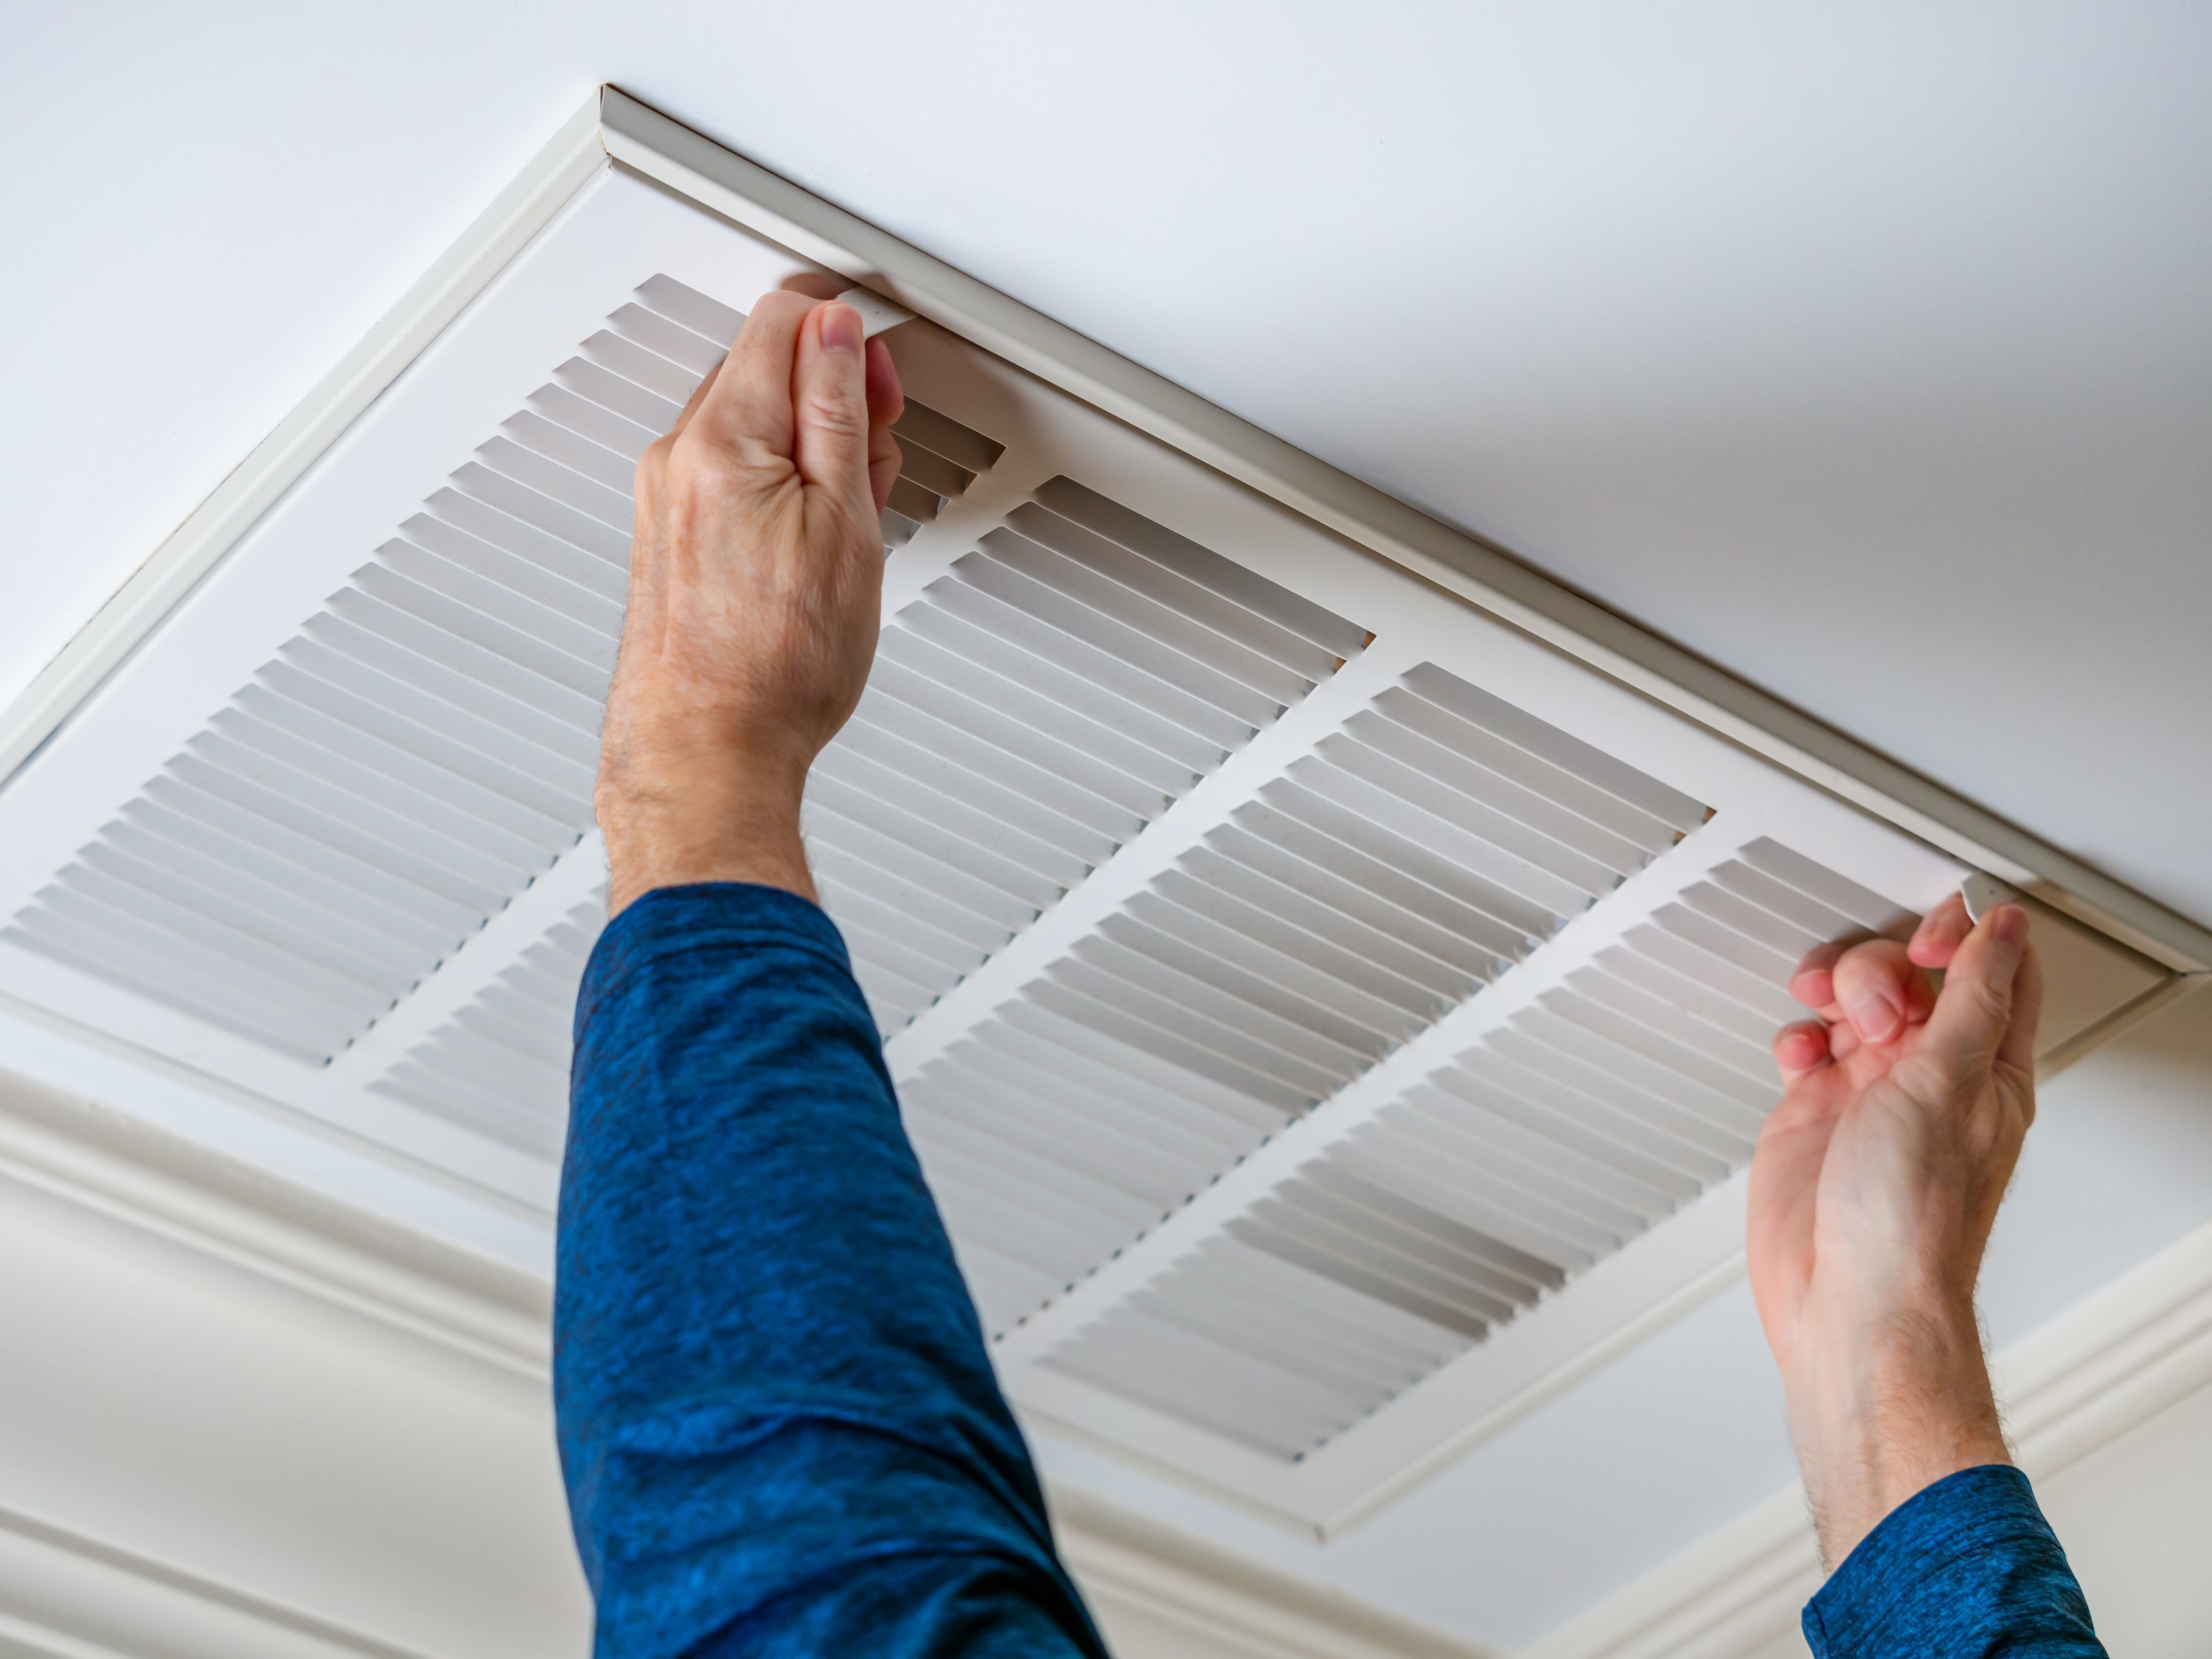 How To Clean an Air Duct: Do's and Don'ts